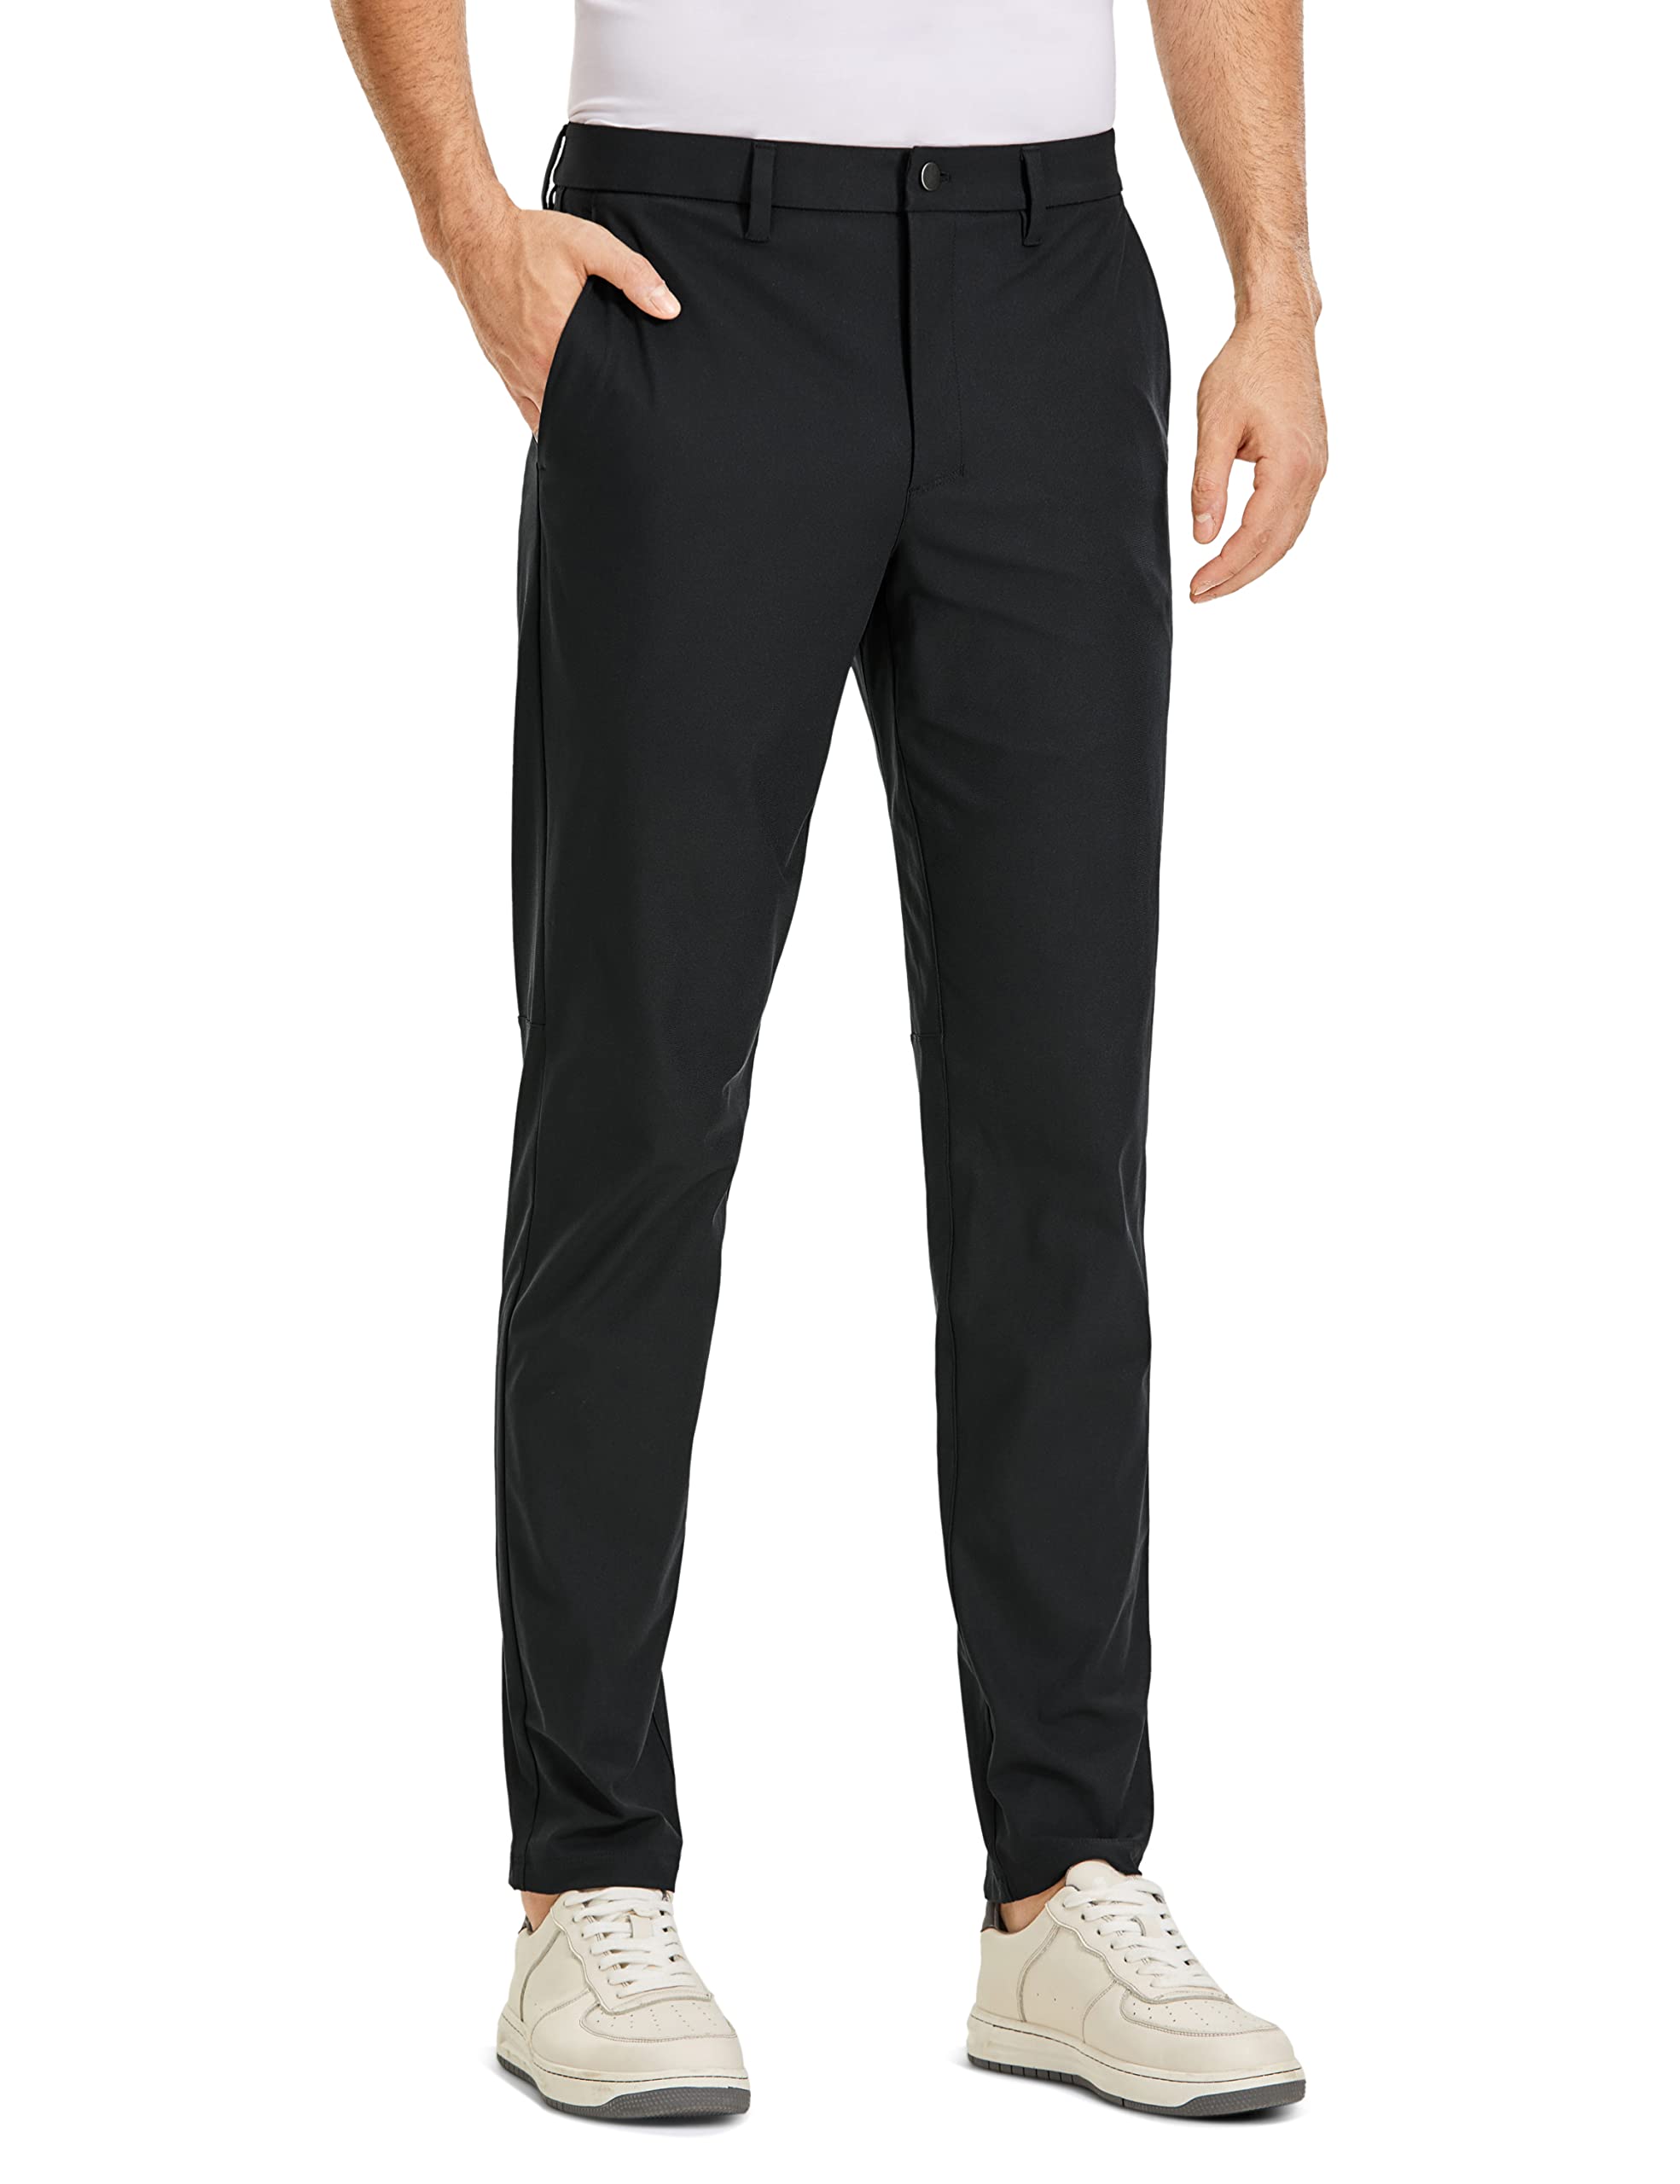 CRZ YOGA Men's All-Day Comfort Golf Pants - 30/32/34 Quick Dry  Lightweight Work Casual Trousers with Pockets 36W x 32L Black